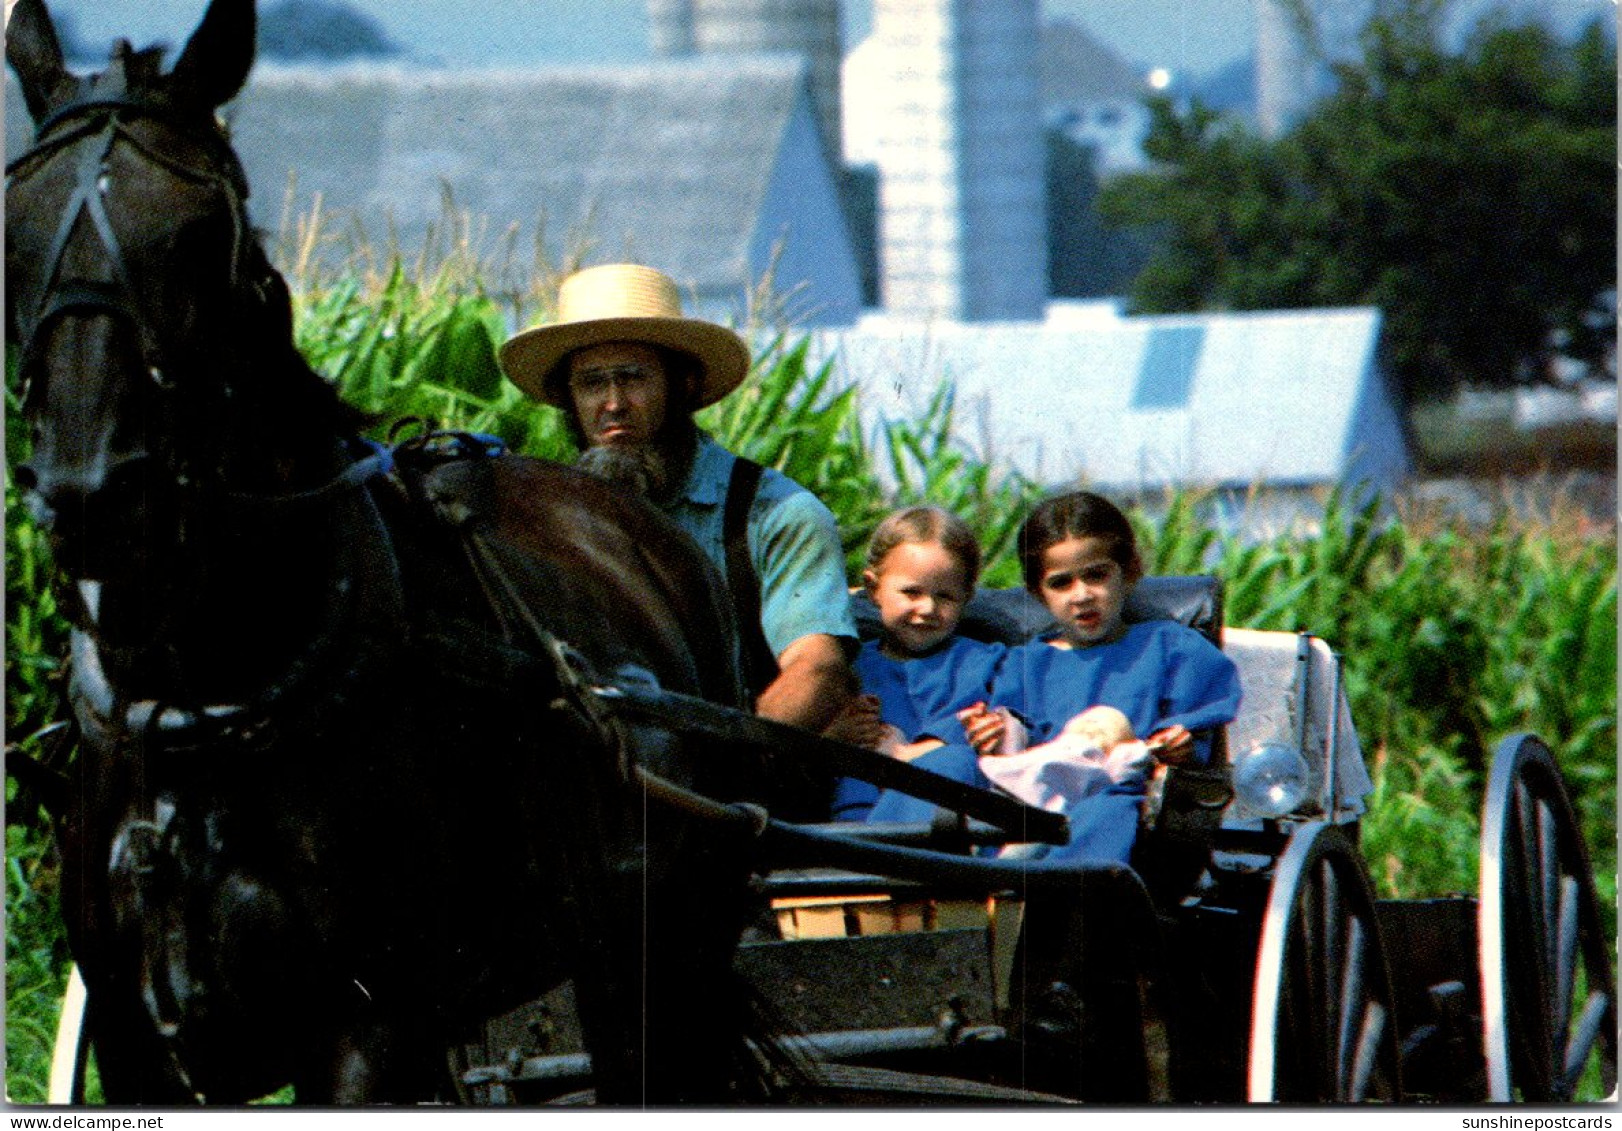 Pennsylvania Amish Country Amish Father And Two Daughters Riding In Courting Or Open Buggy - Lancaster